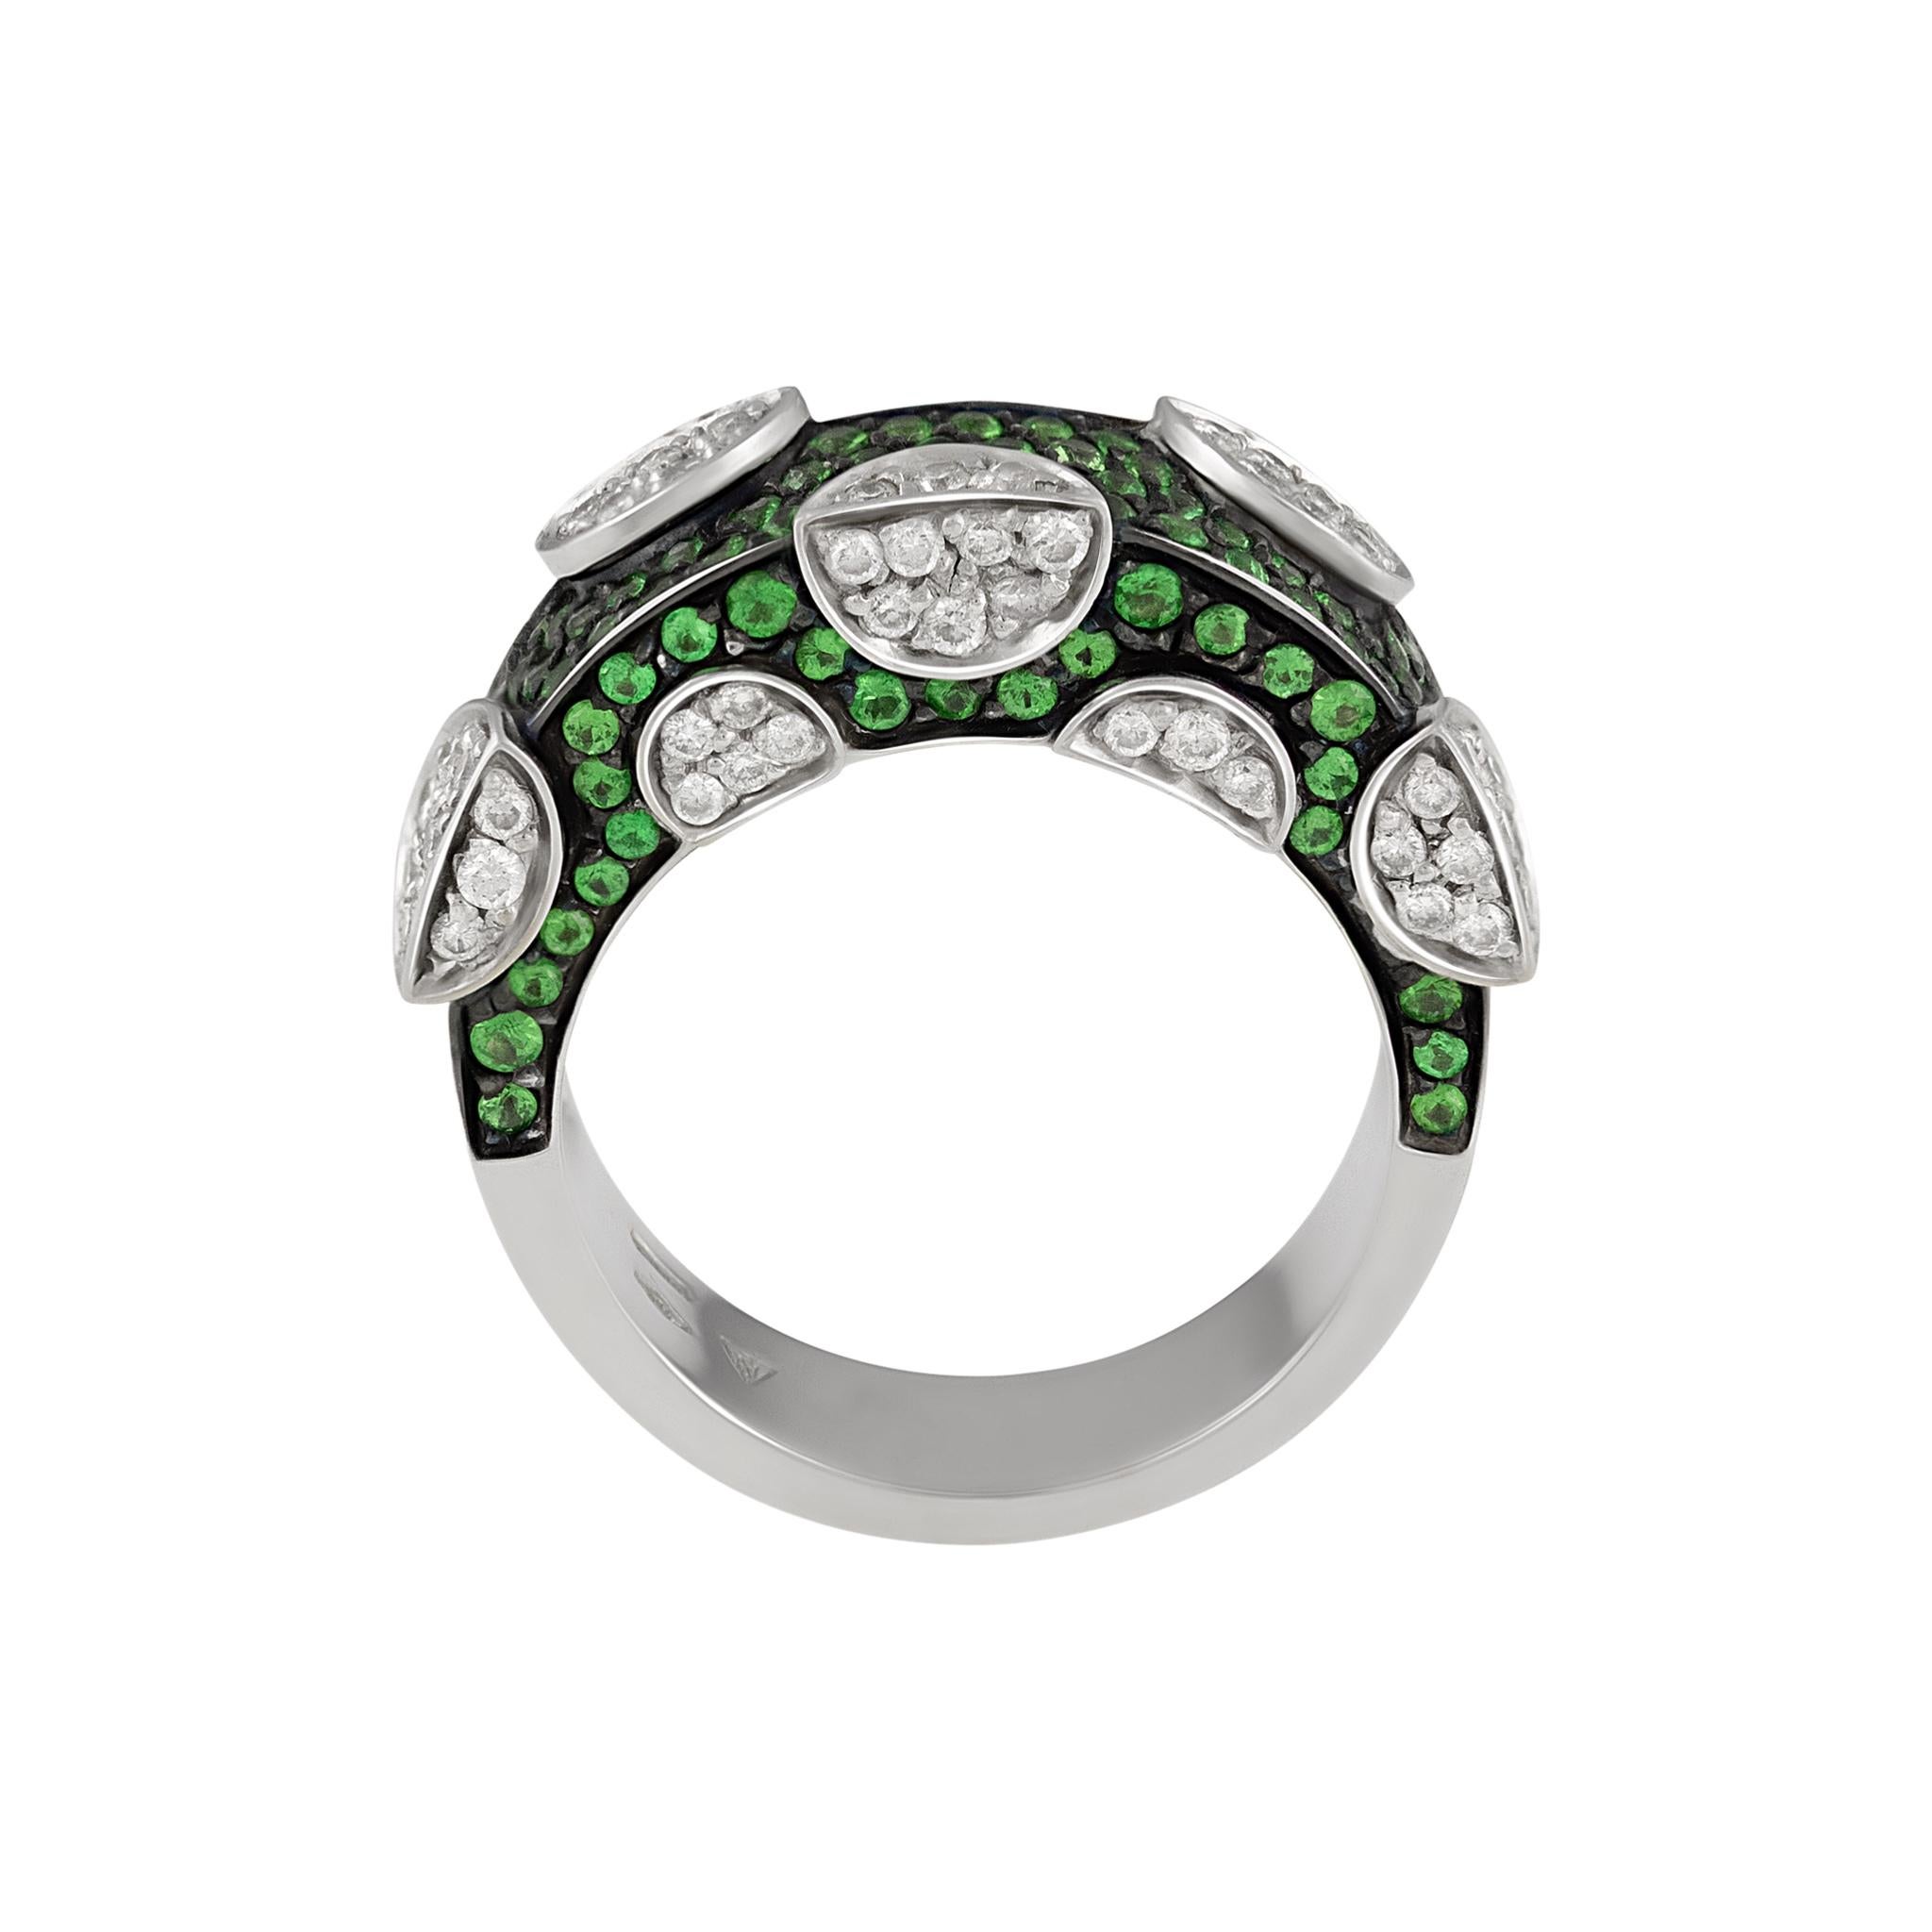 Stefan Hafner Ring
Diamond: 0.68ctw
Tsavorite: 1.00ctw
Size: 7.25
Italian made
Retail price: $10,750.00
SKU: BLU01120

Stefan Hafner jewels are dreams of light that become high jewelry pieces with the purest stones and excellent Italian